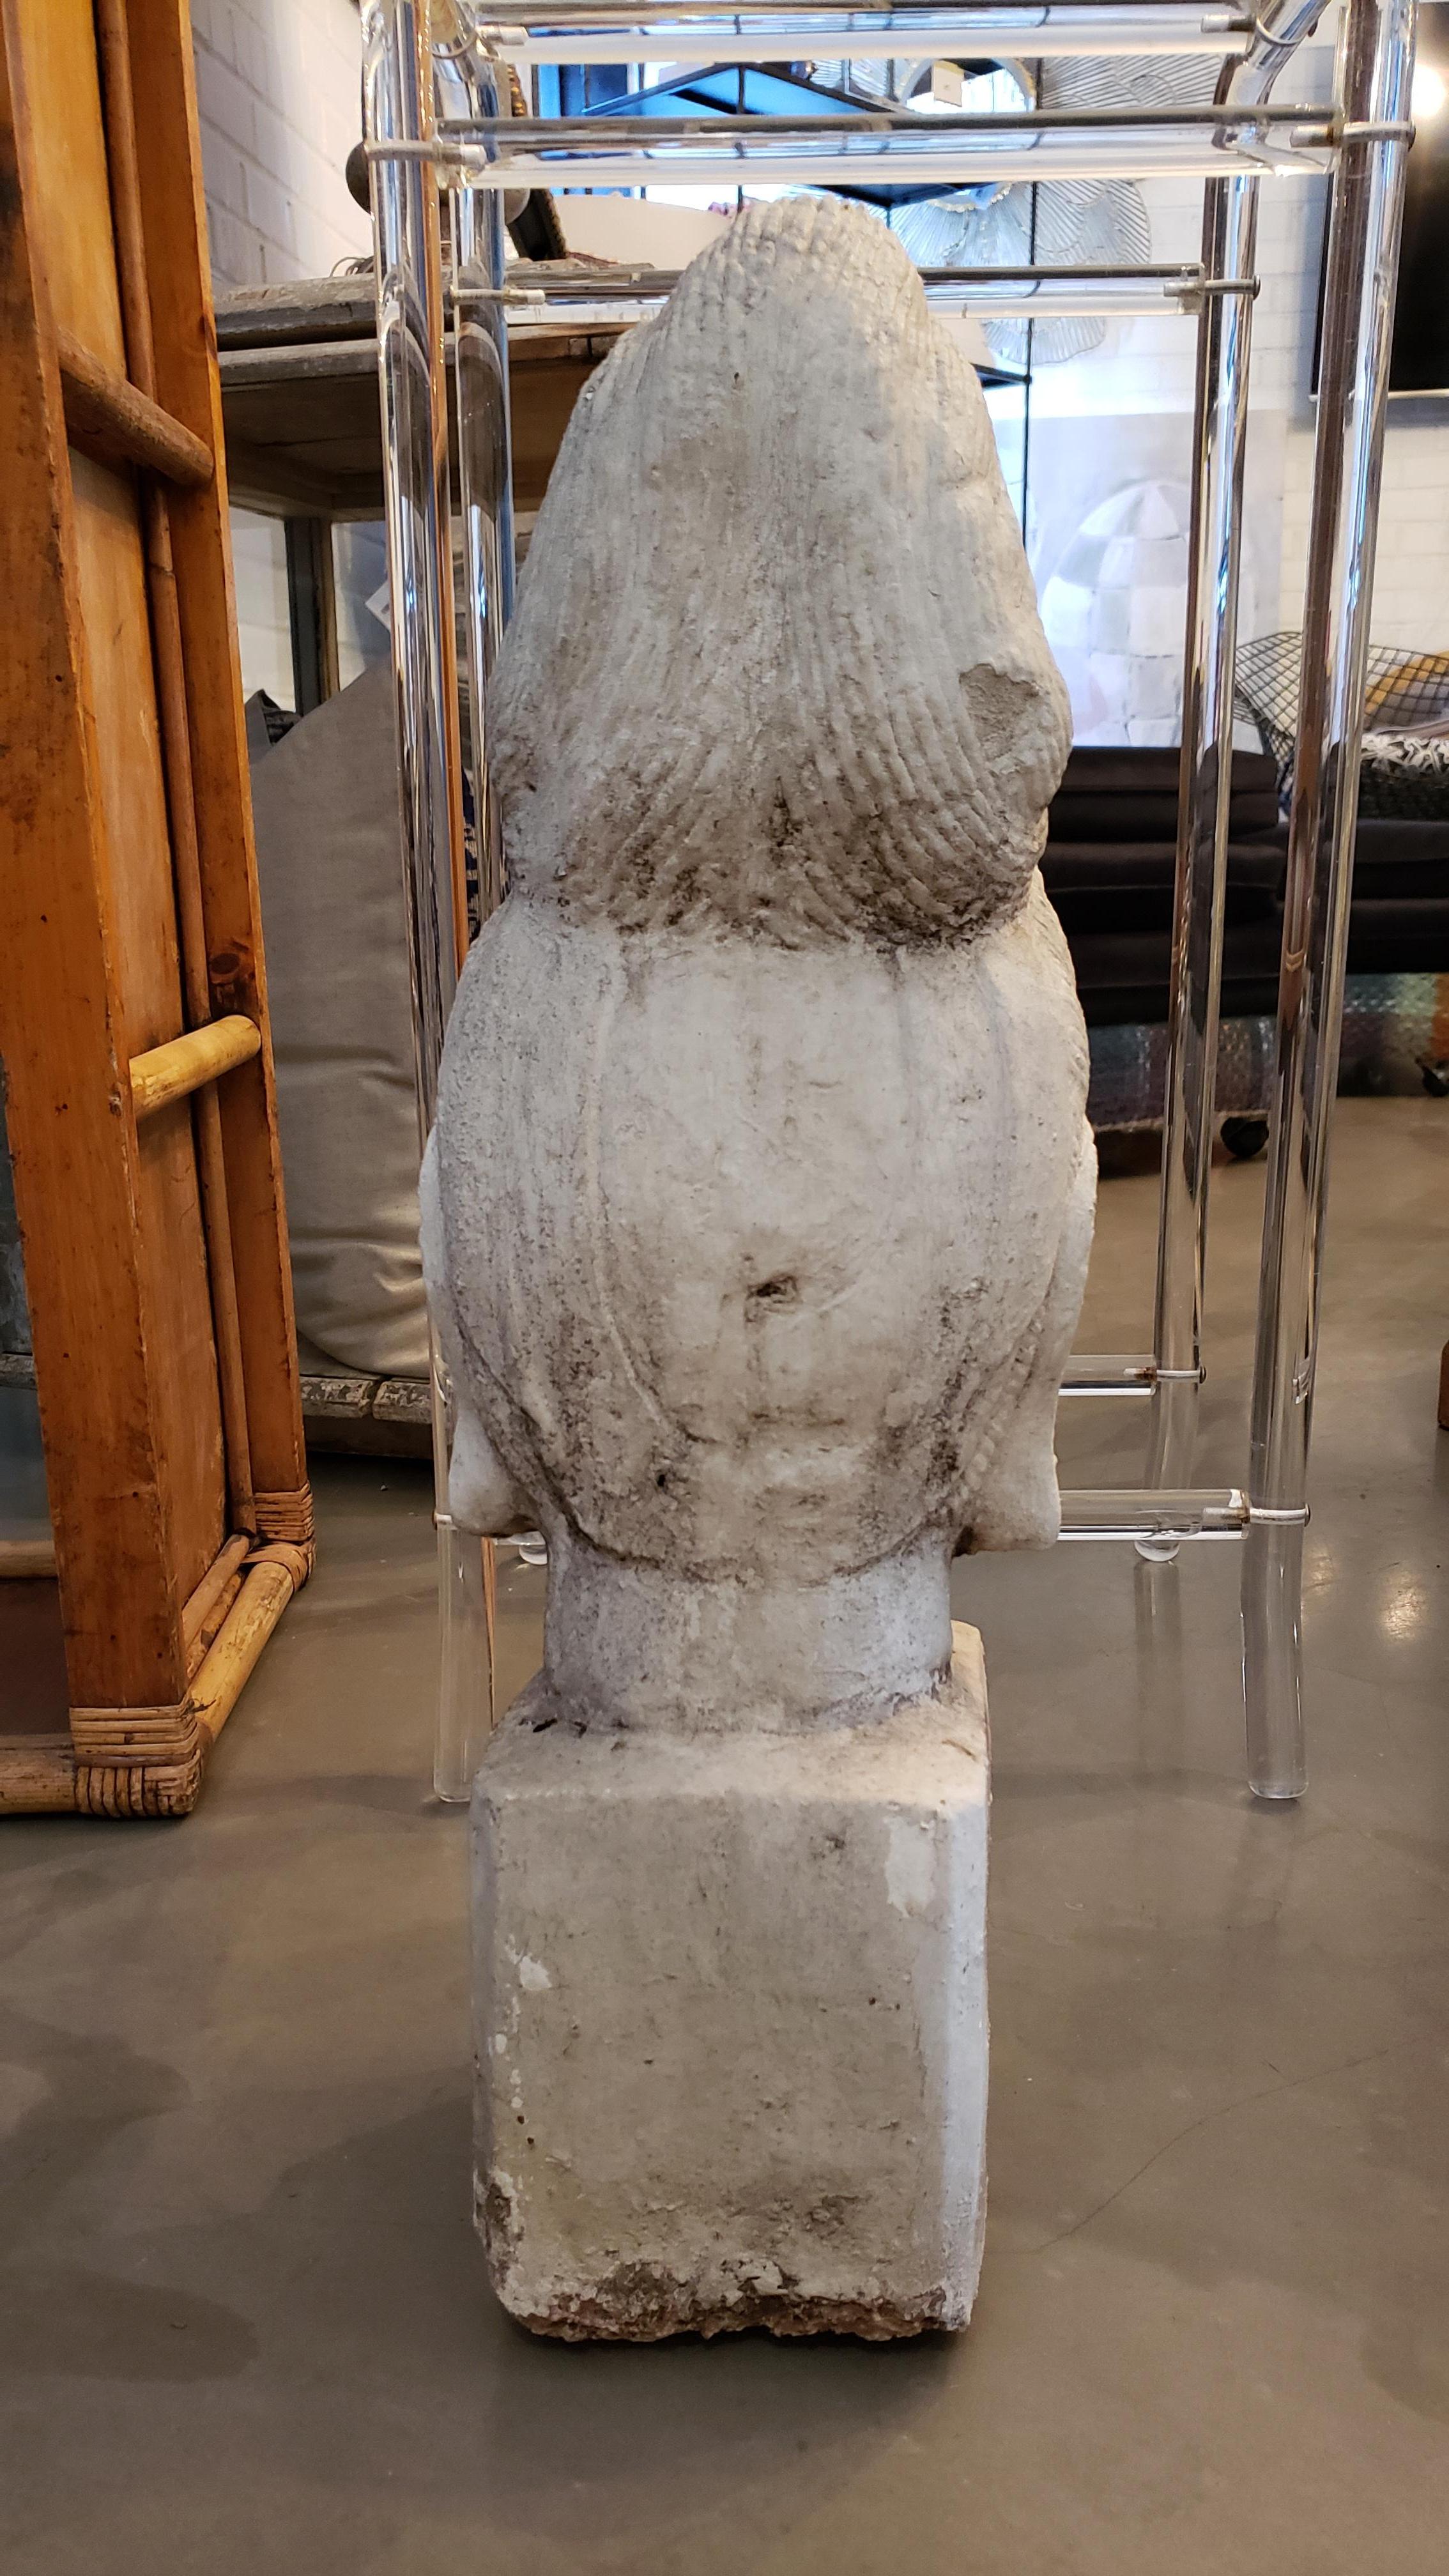 This Buddha sculpture has all the right patina and chipping to feel anything but reproduced. It is truly a classic artistic element for either indoor or garden display.